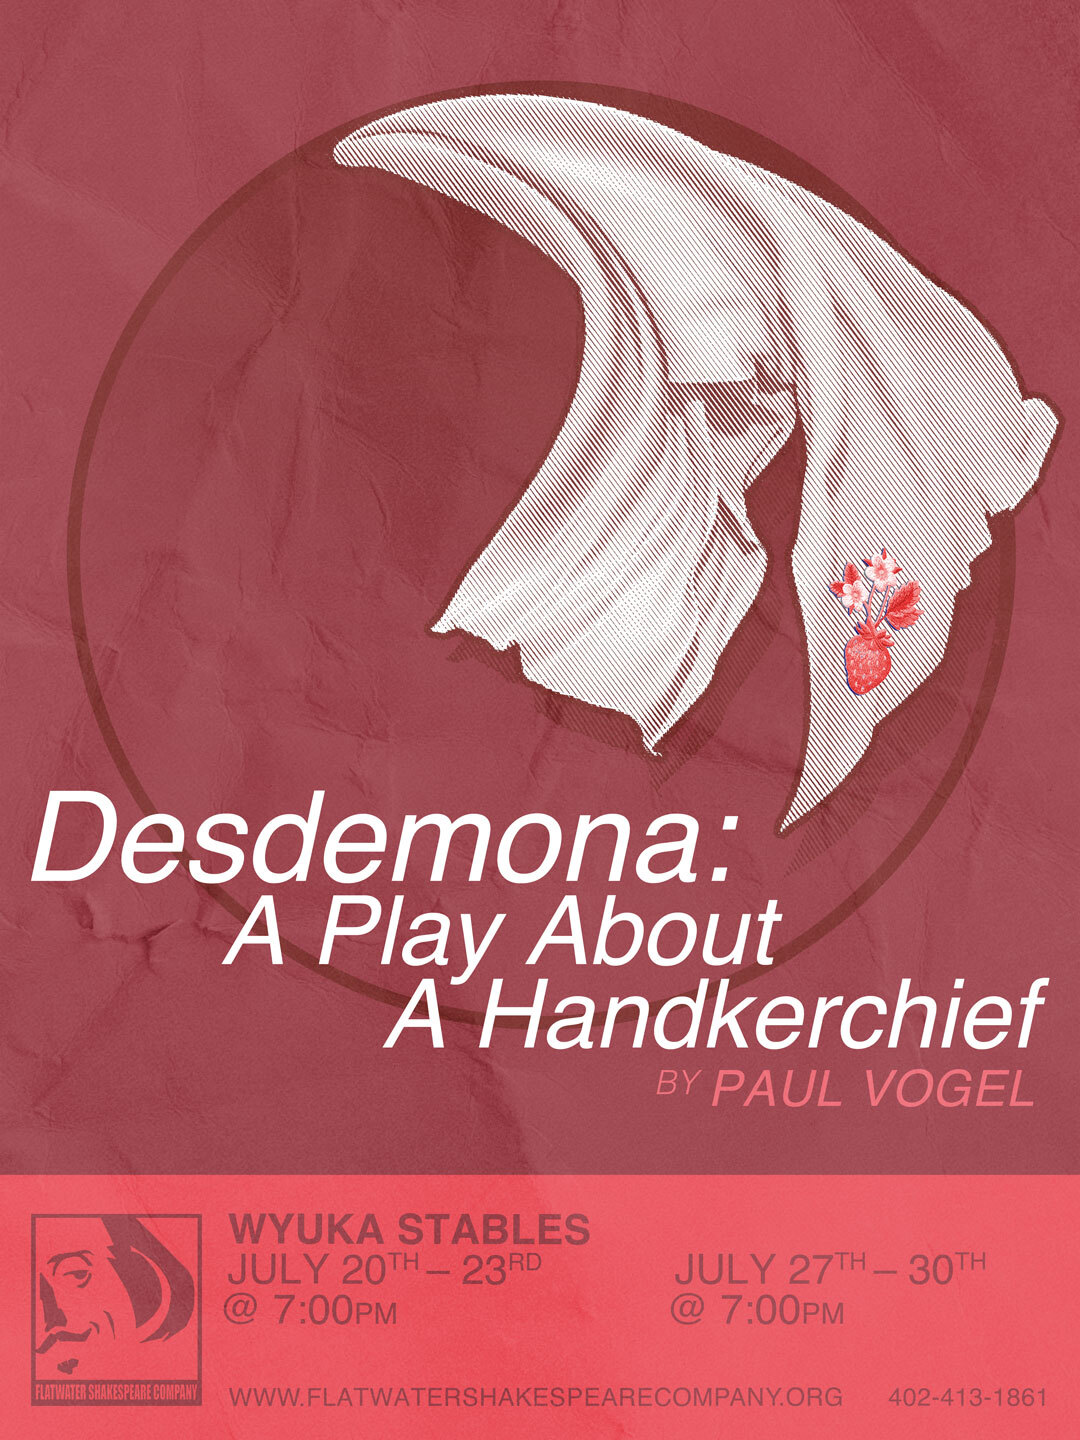 7/21 SEN - SENIOR (65+): Friday. July 21, 2023 | 7:00 p.m. - 10:00 p.m. CST | Wyuka Stables (Desdemona: A Play about a Handkerchief)